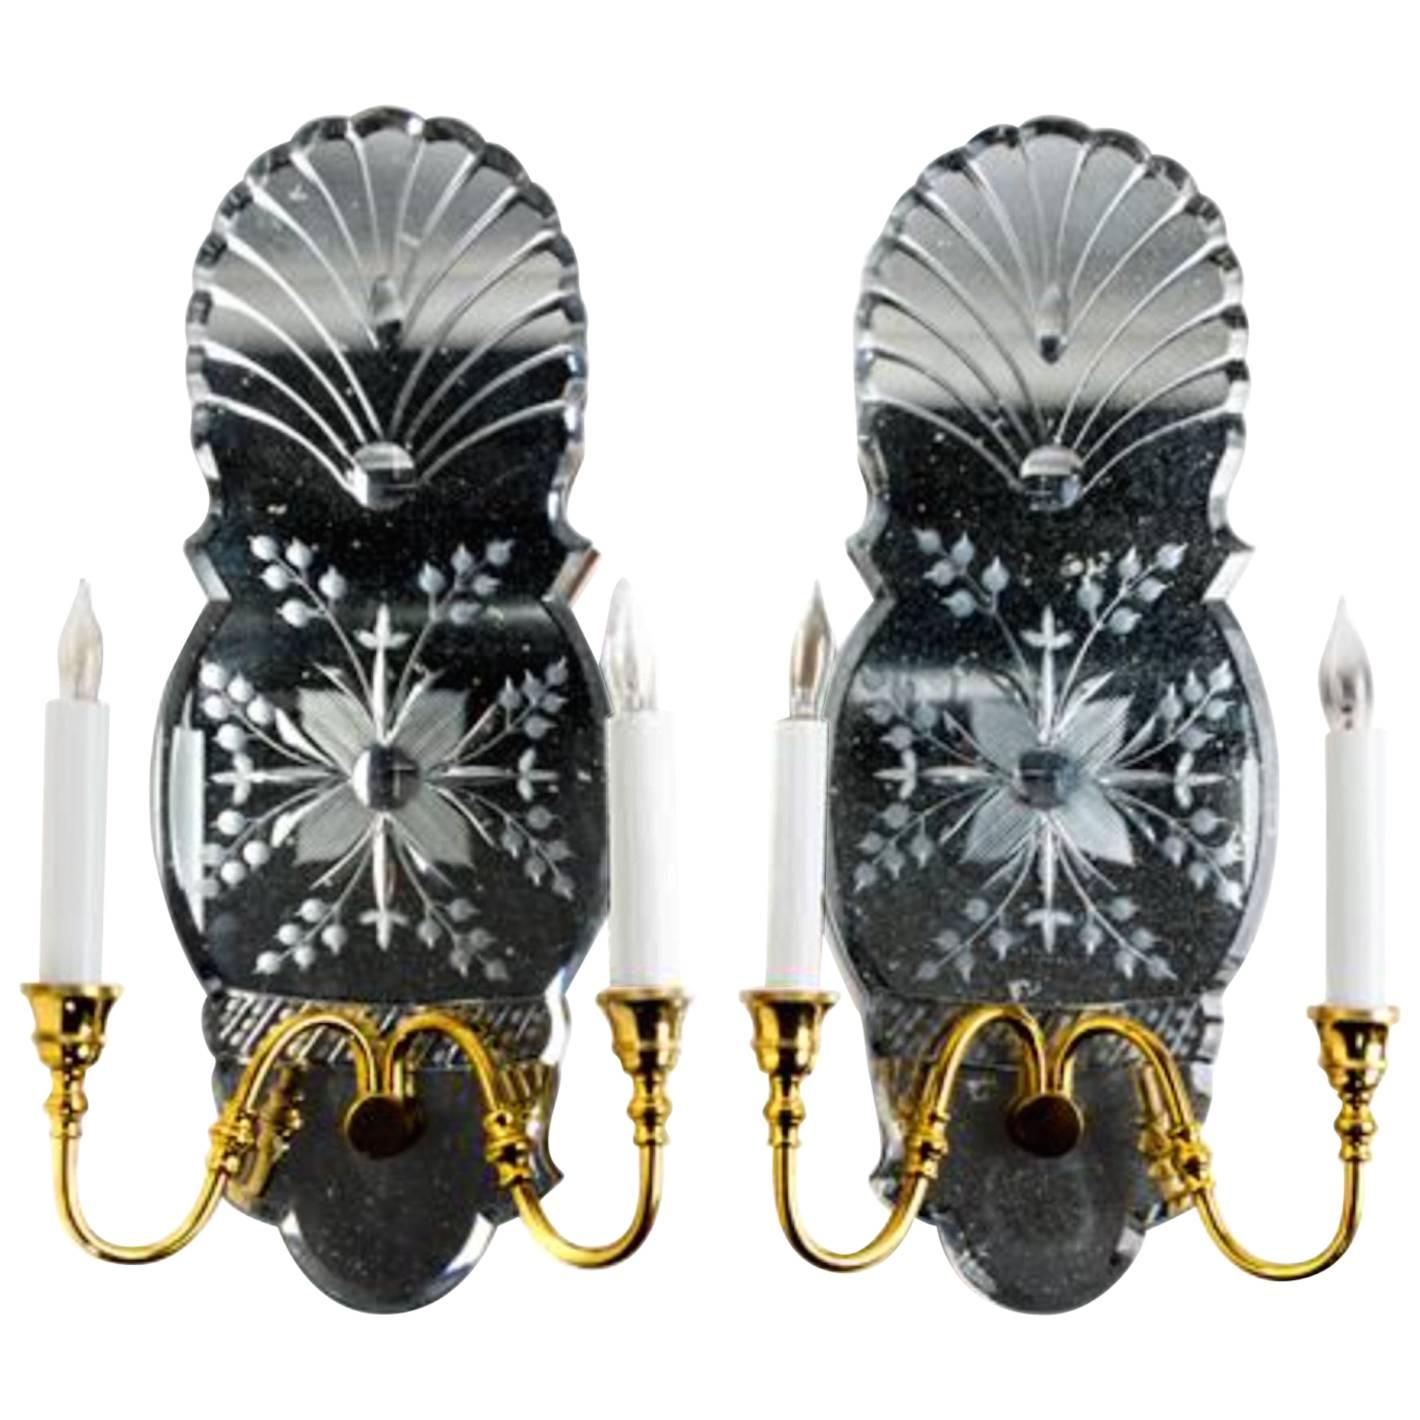 Pair of Venetian Glass Two-Light Sconces Beautifully Etched On Antiqued Mirror.